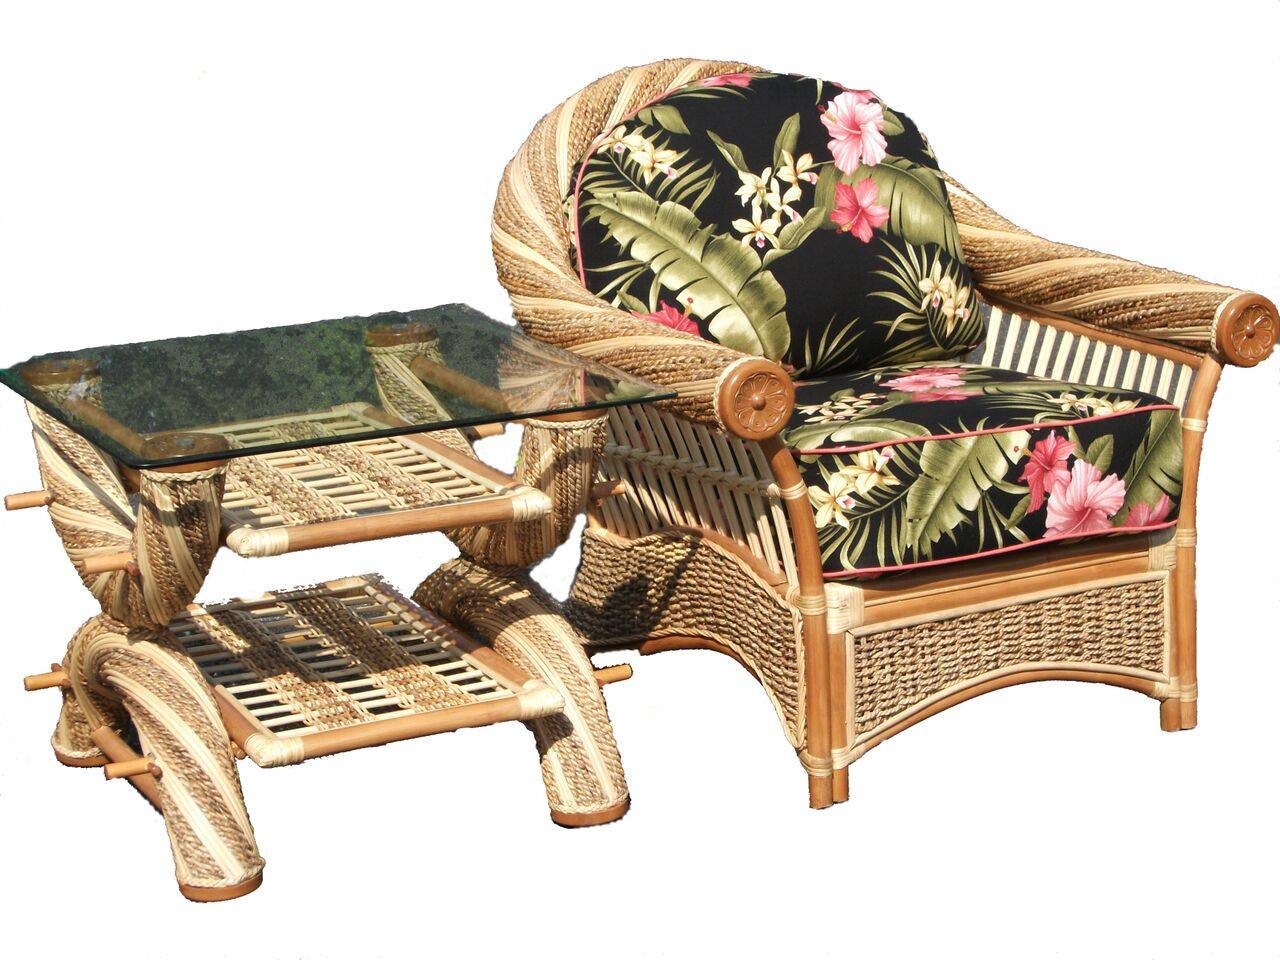 Spice Islands Spice Islands Maui Twist End Table Natural End Table - Rattan Imports